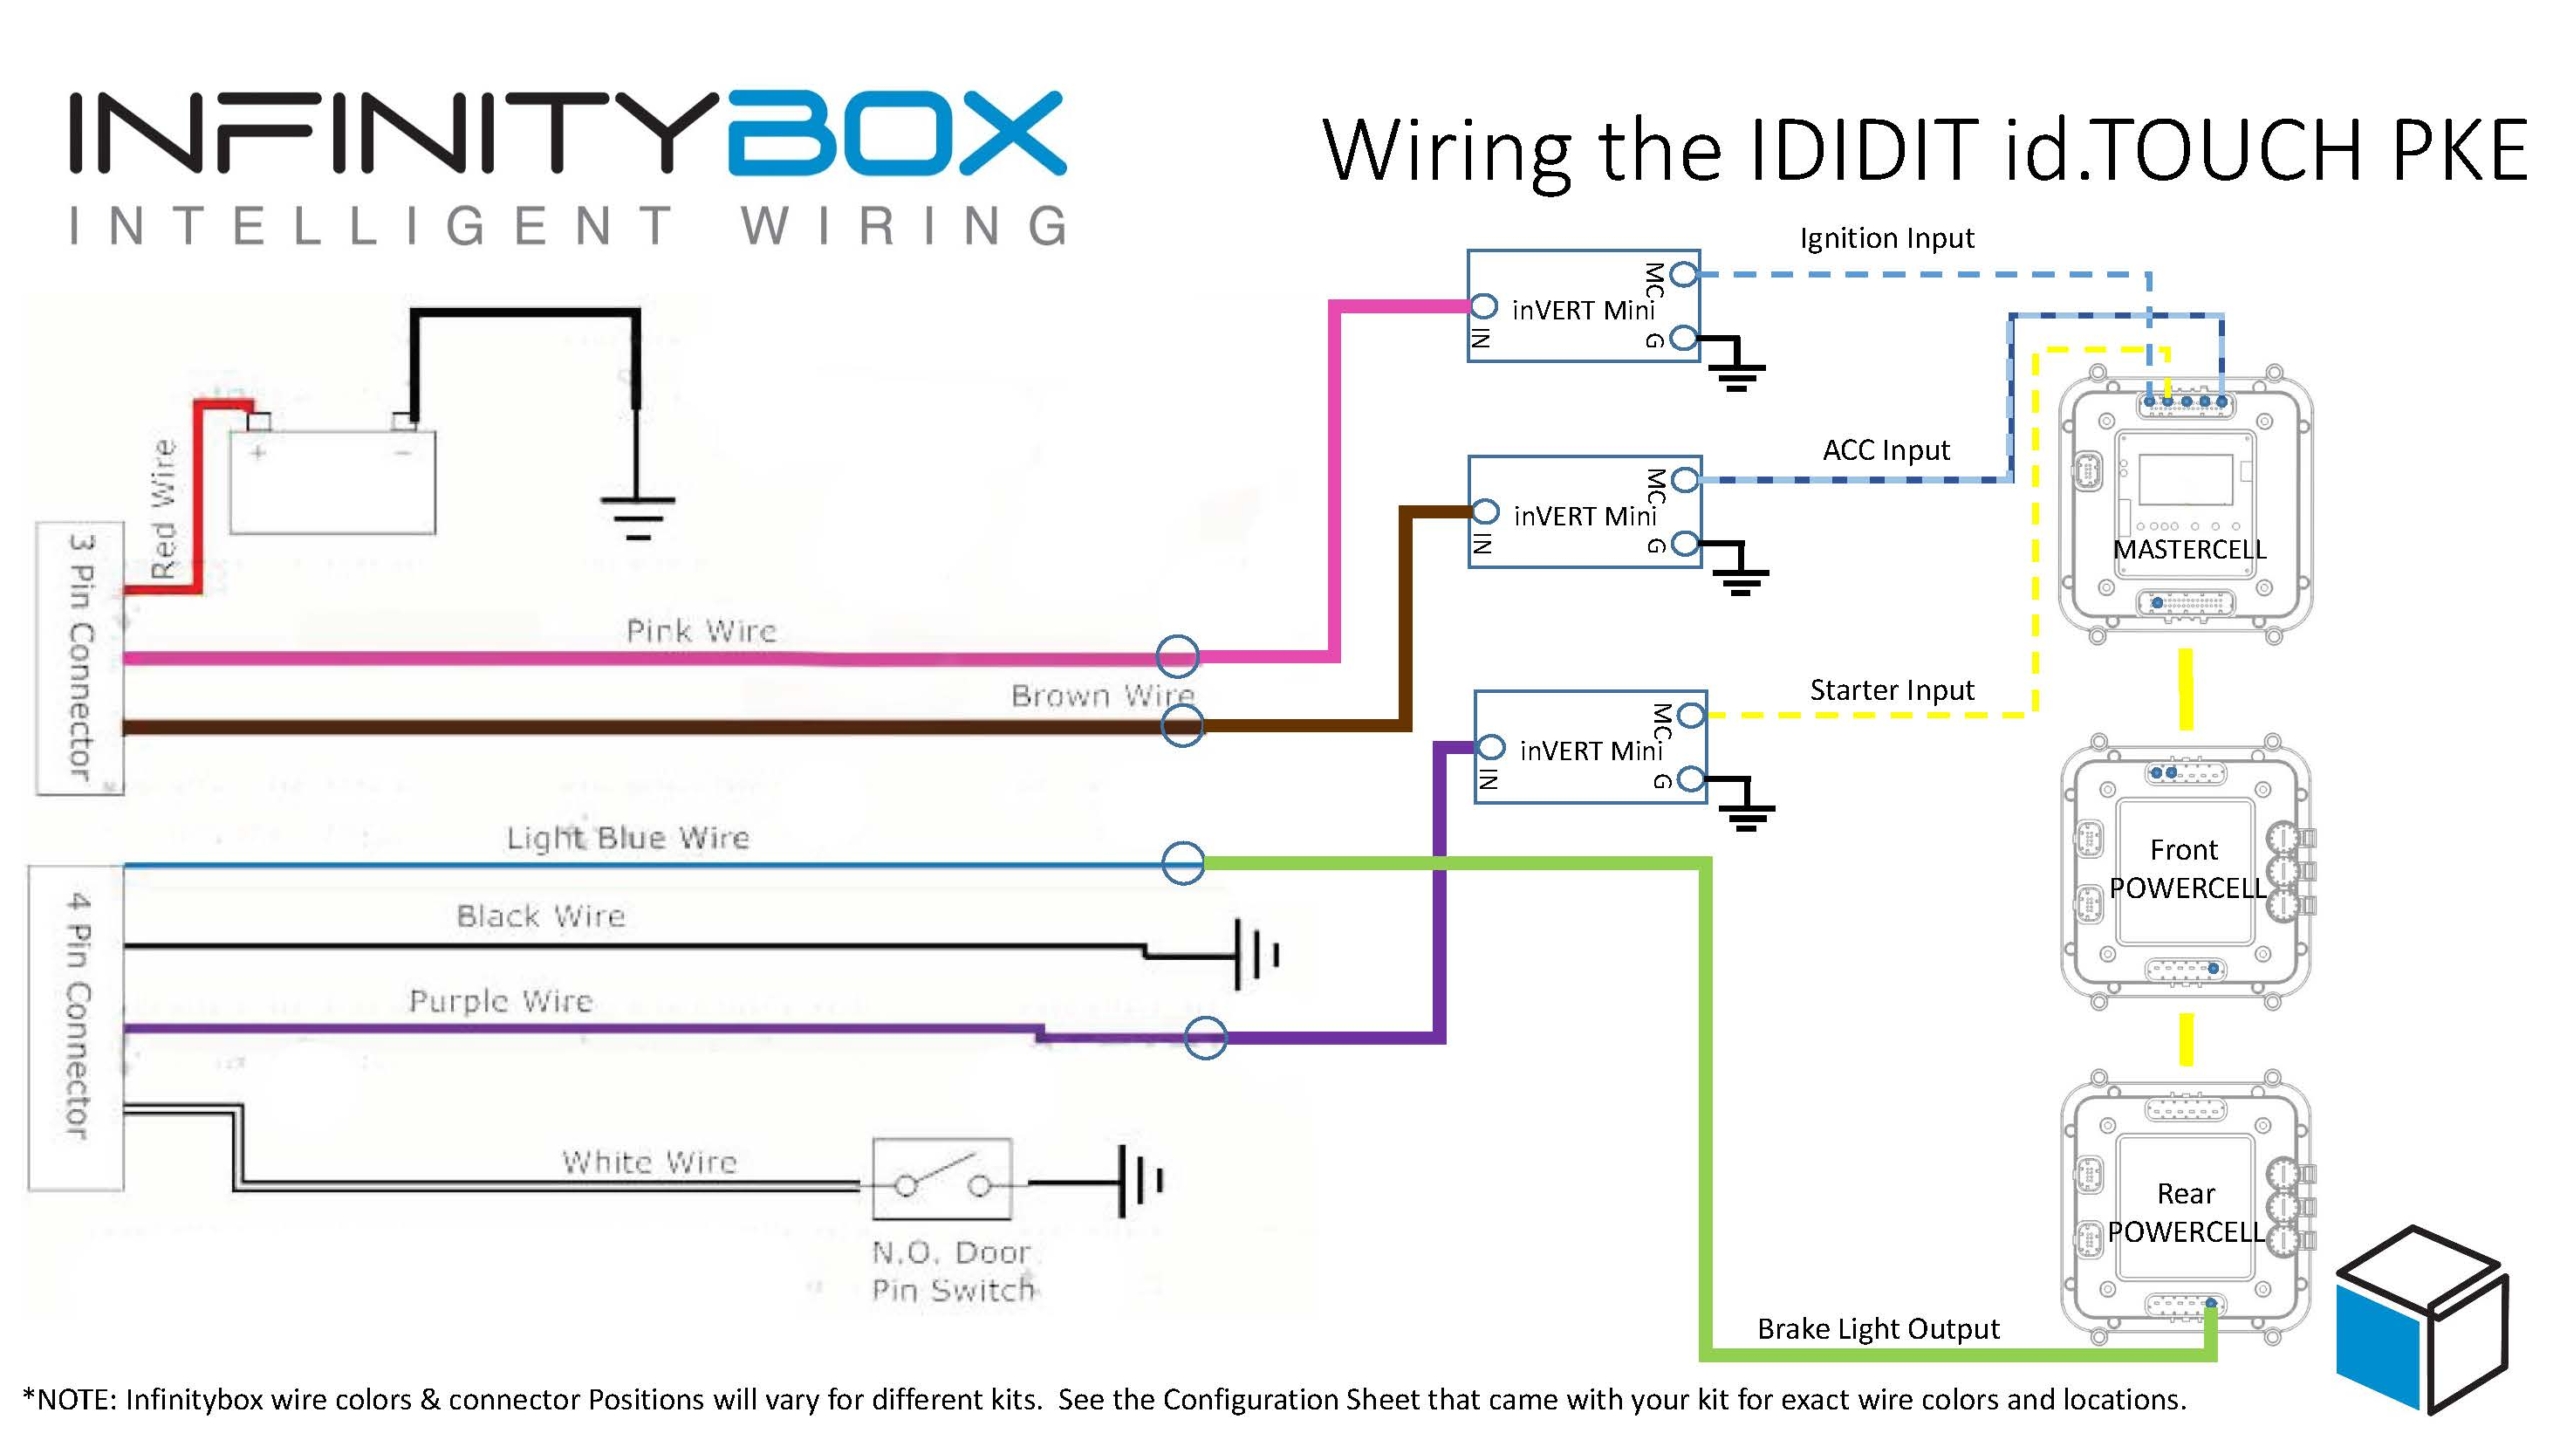 Wiring the IDIDIT idTOUCH - Infinitybox